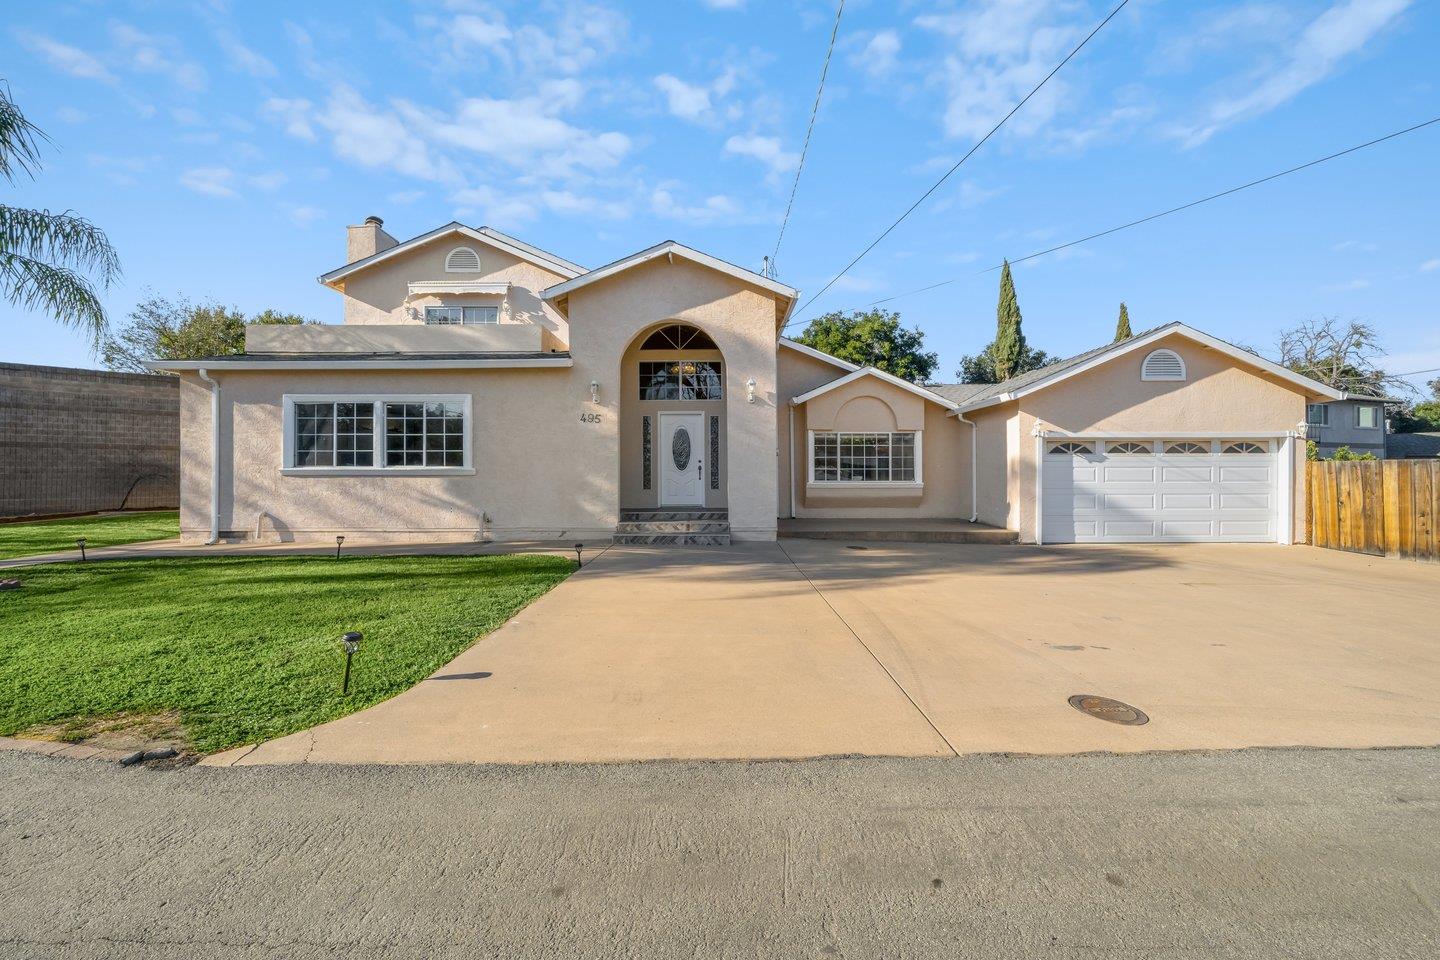 495 Alice AVE, MOUNTAIN VIEW, CA 94041